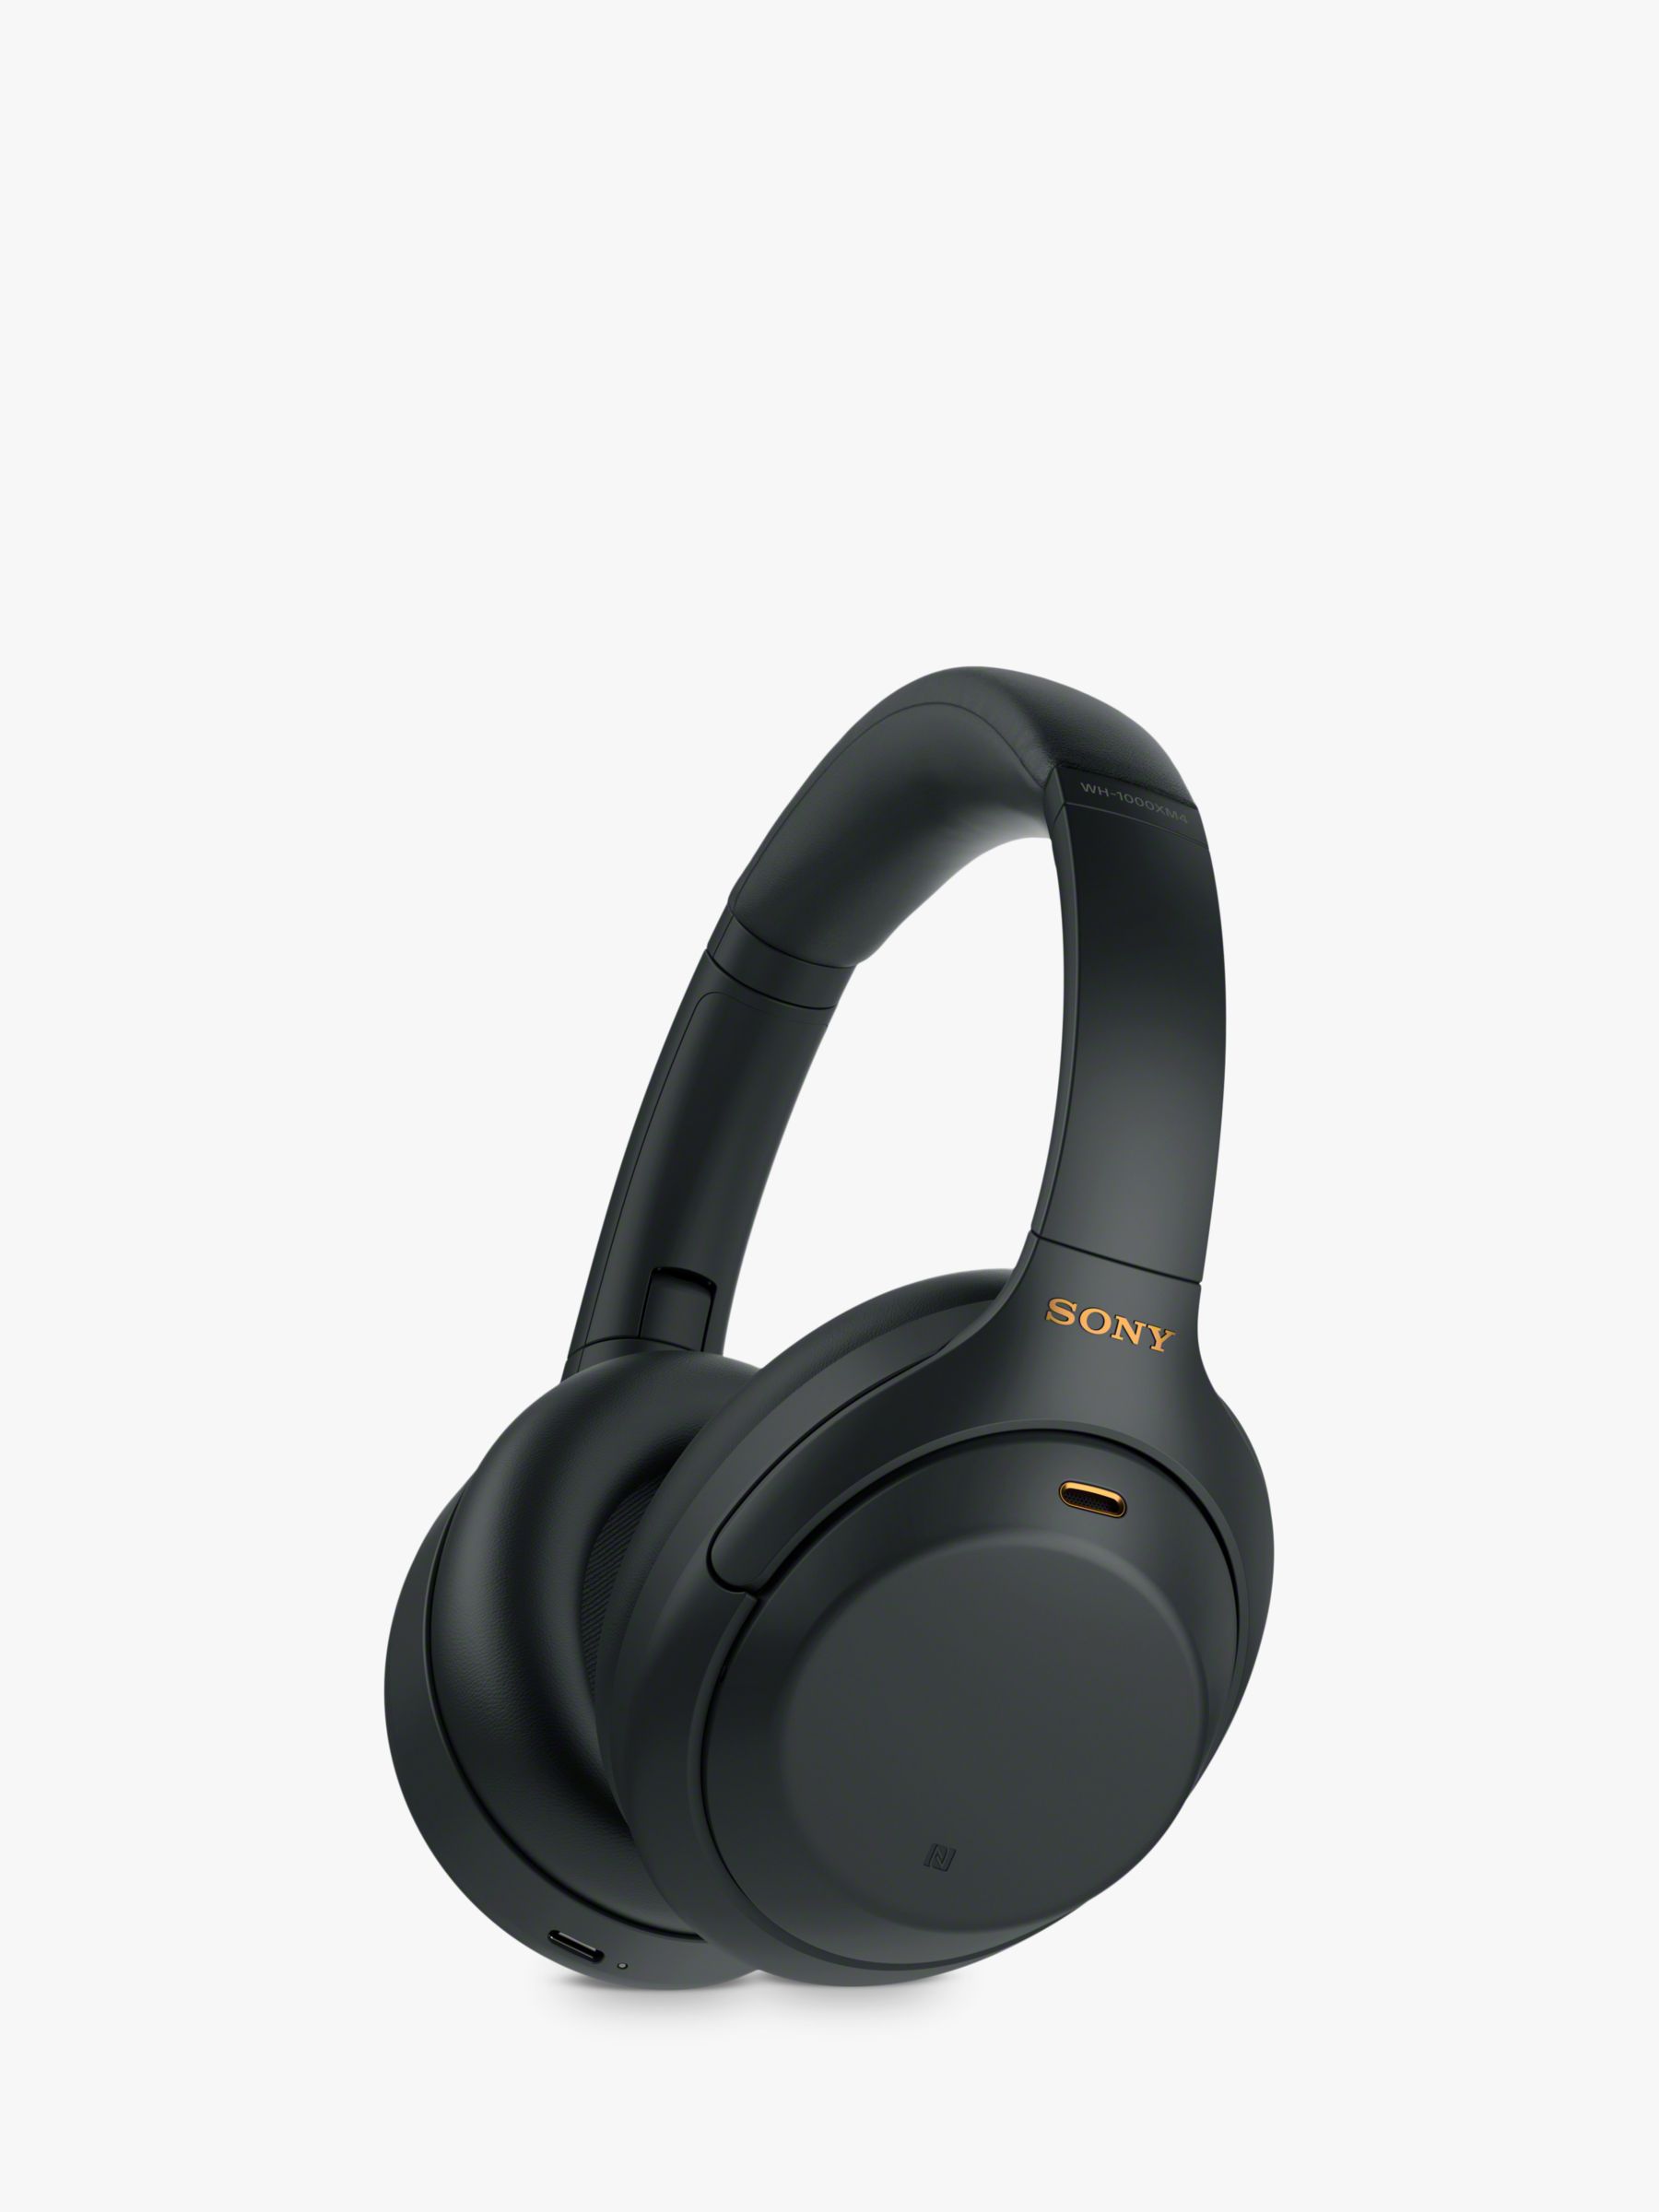 Sony WH-1000XM4 Noise Cancelling Wireless Bluetooth NFC High